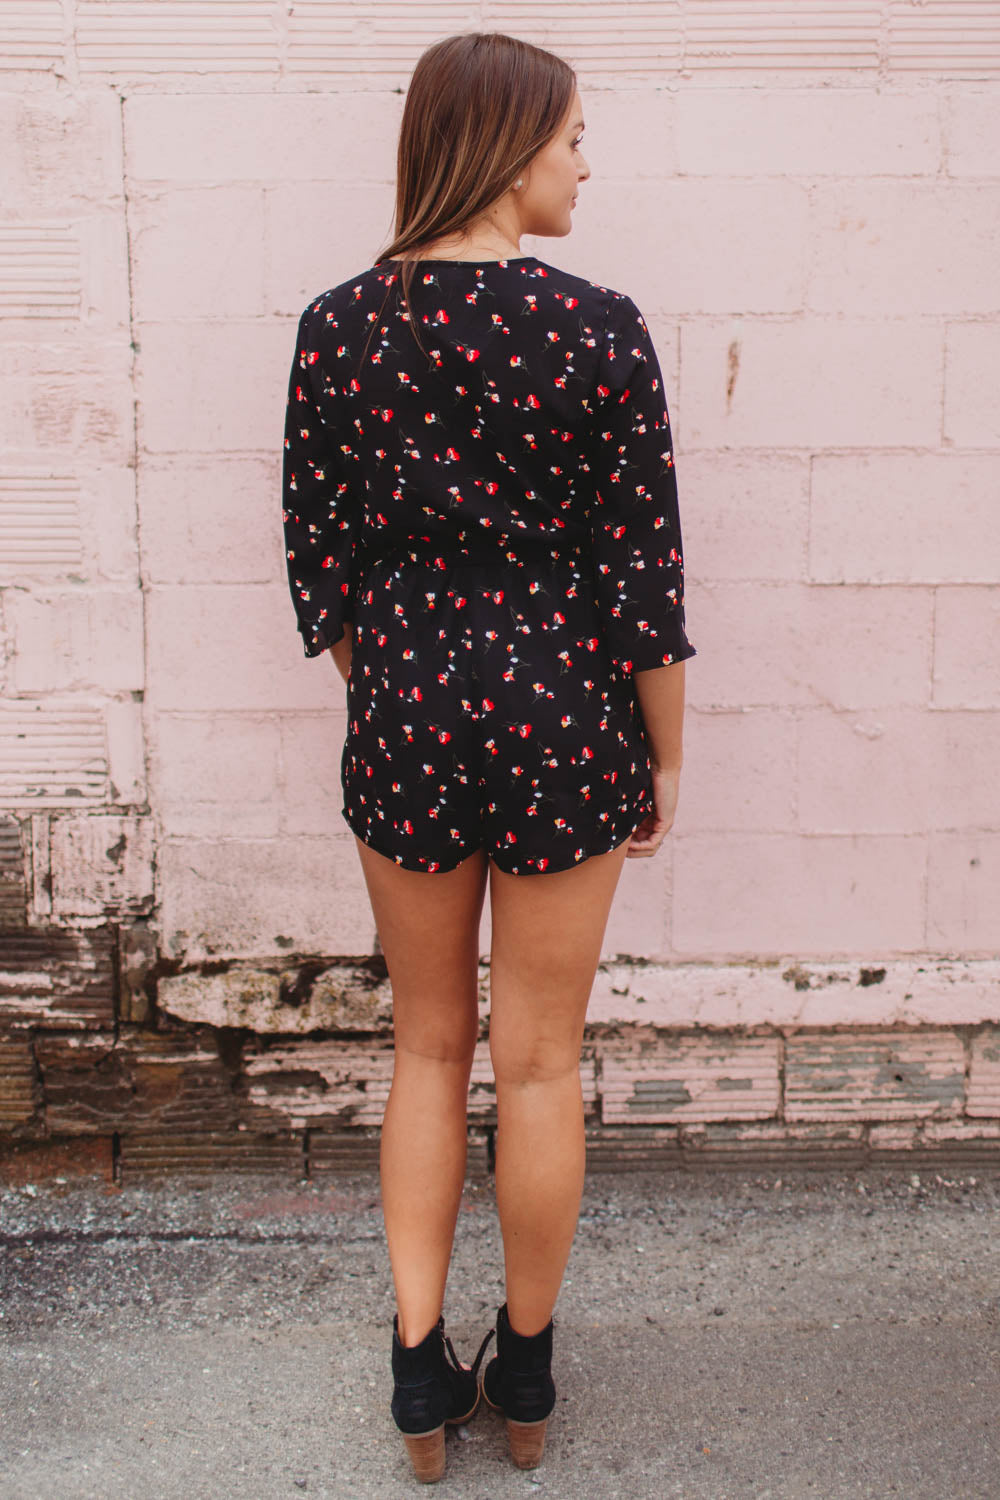 Romper - 3/4 Sleeve Floral Romper with Front Tie